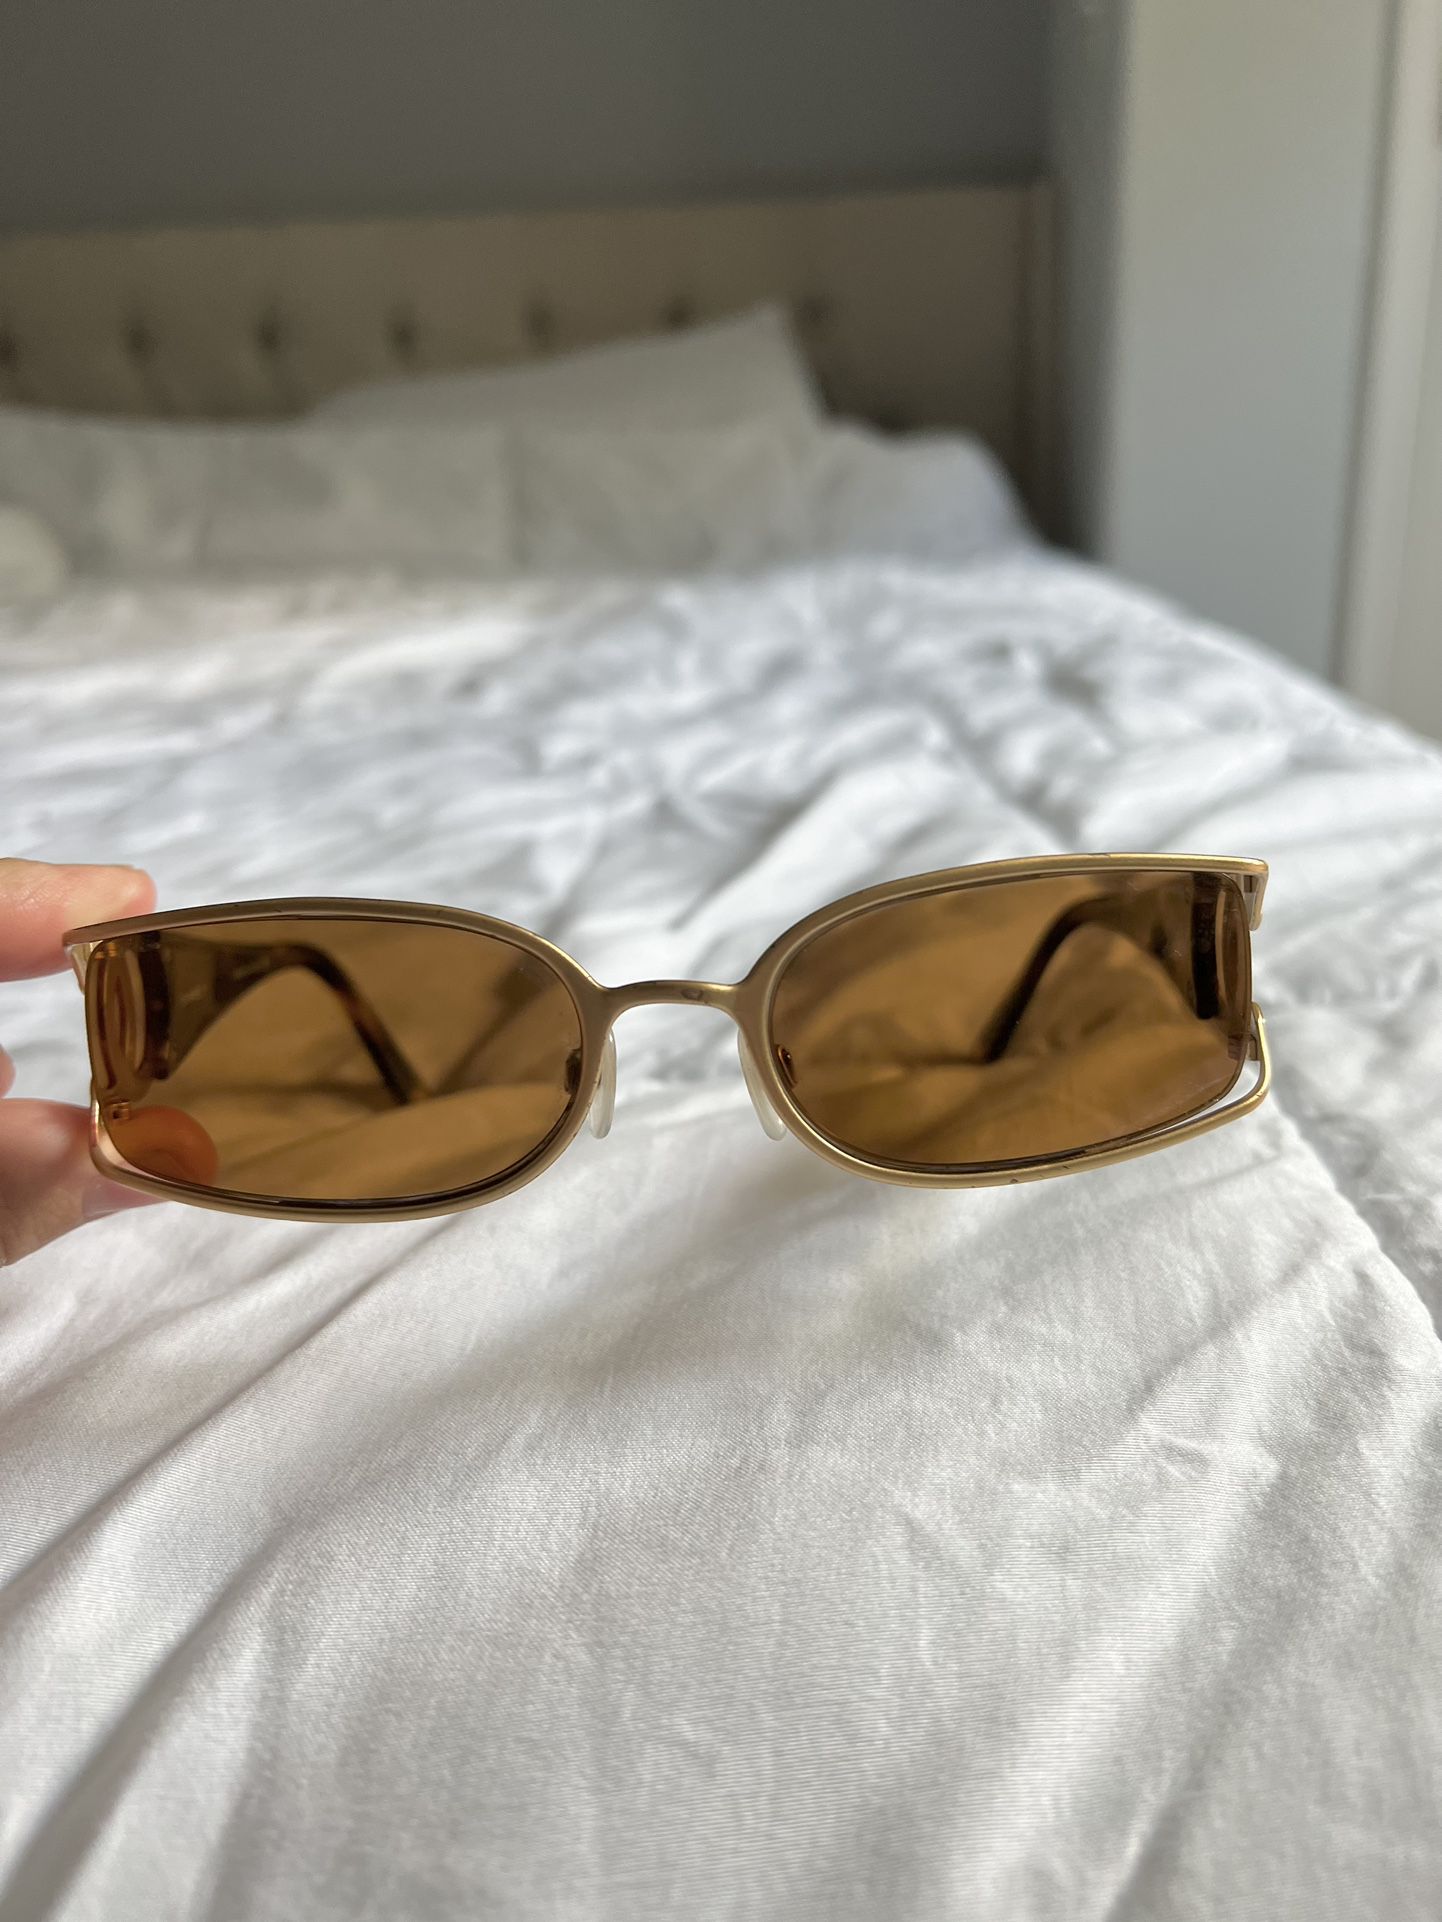 Chanel Sunglasses for Sale in Vancouver, WA - OfferUp